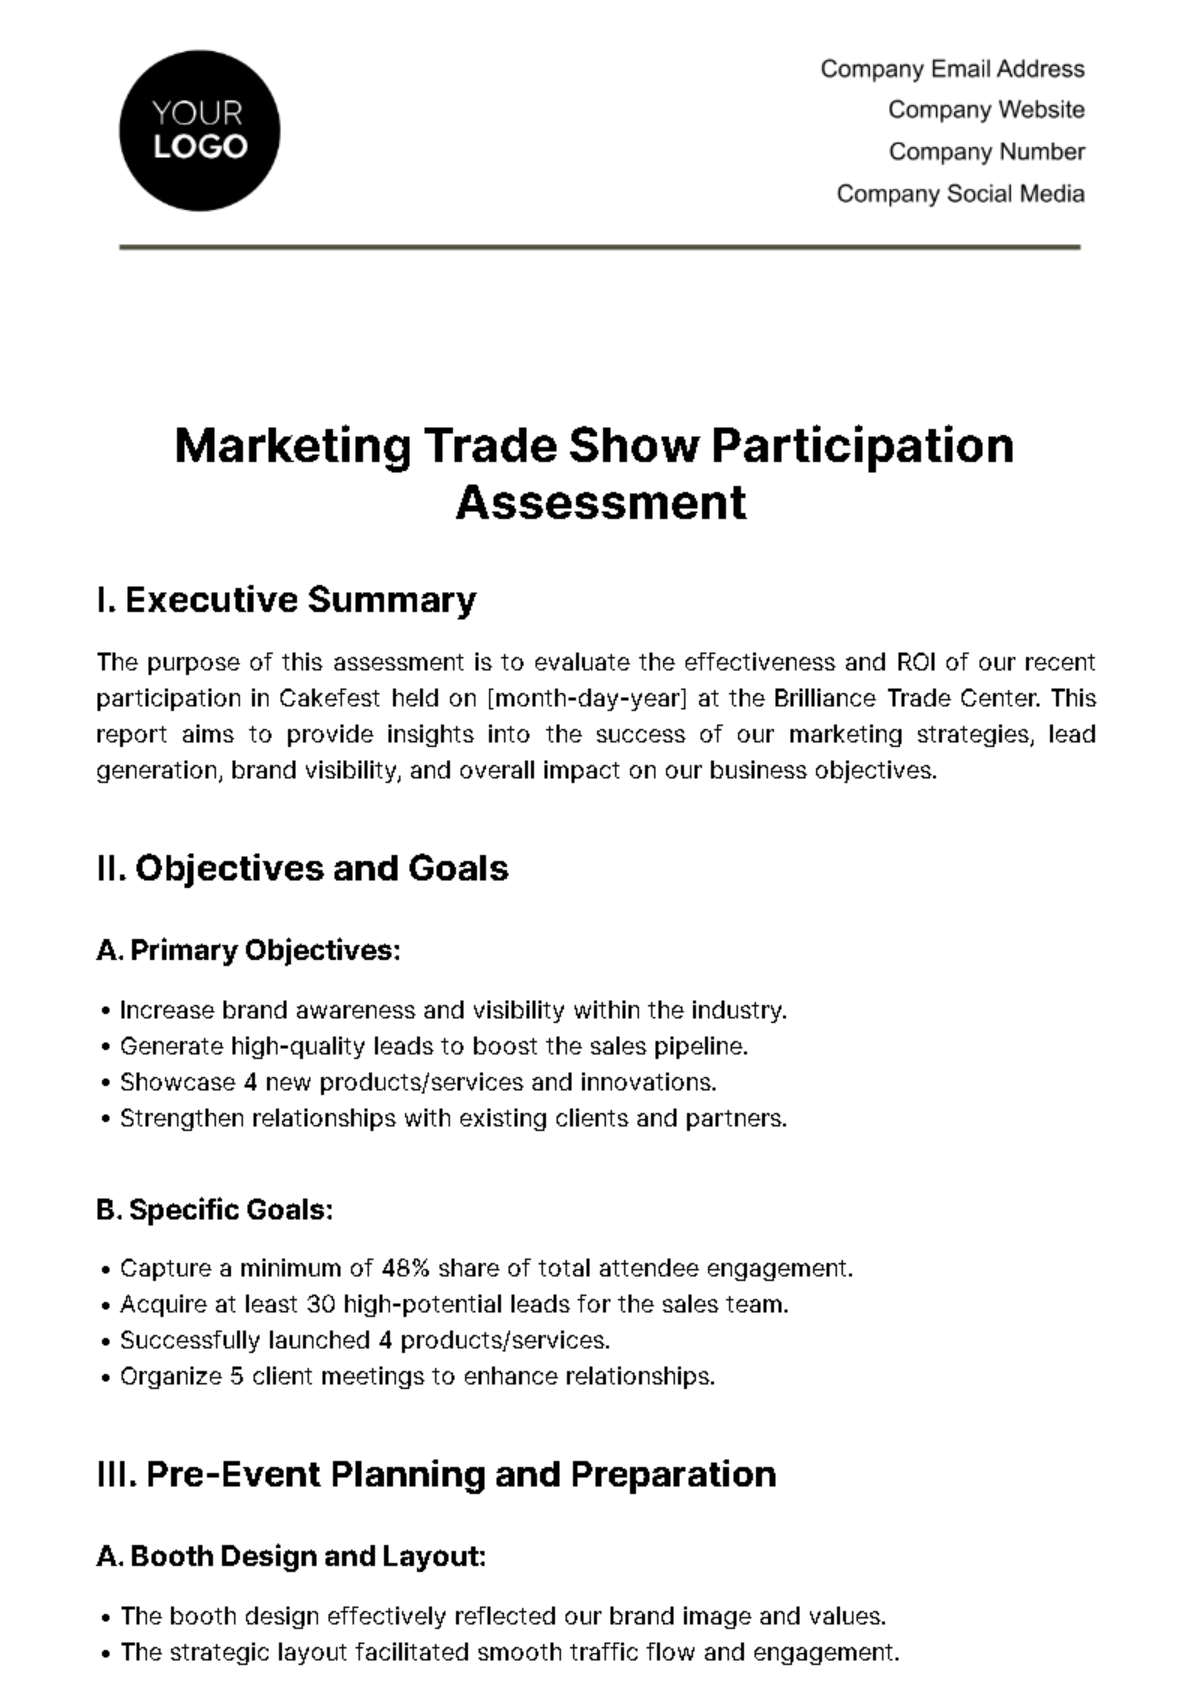 Marketing Trade Show Participation Assessment Template